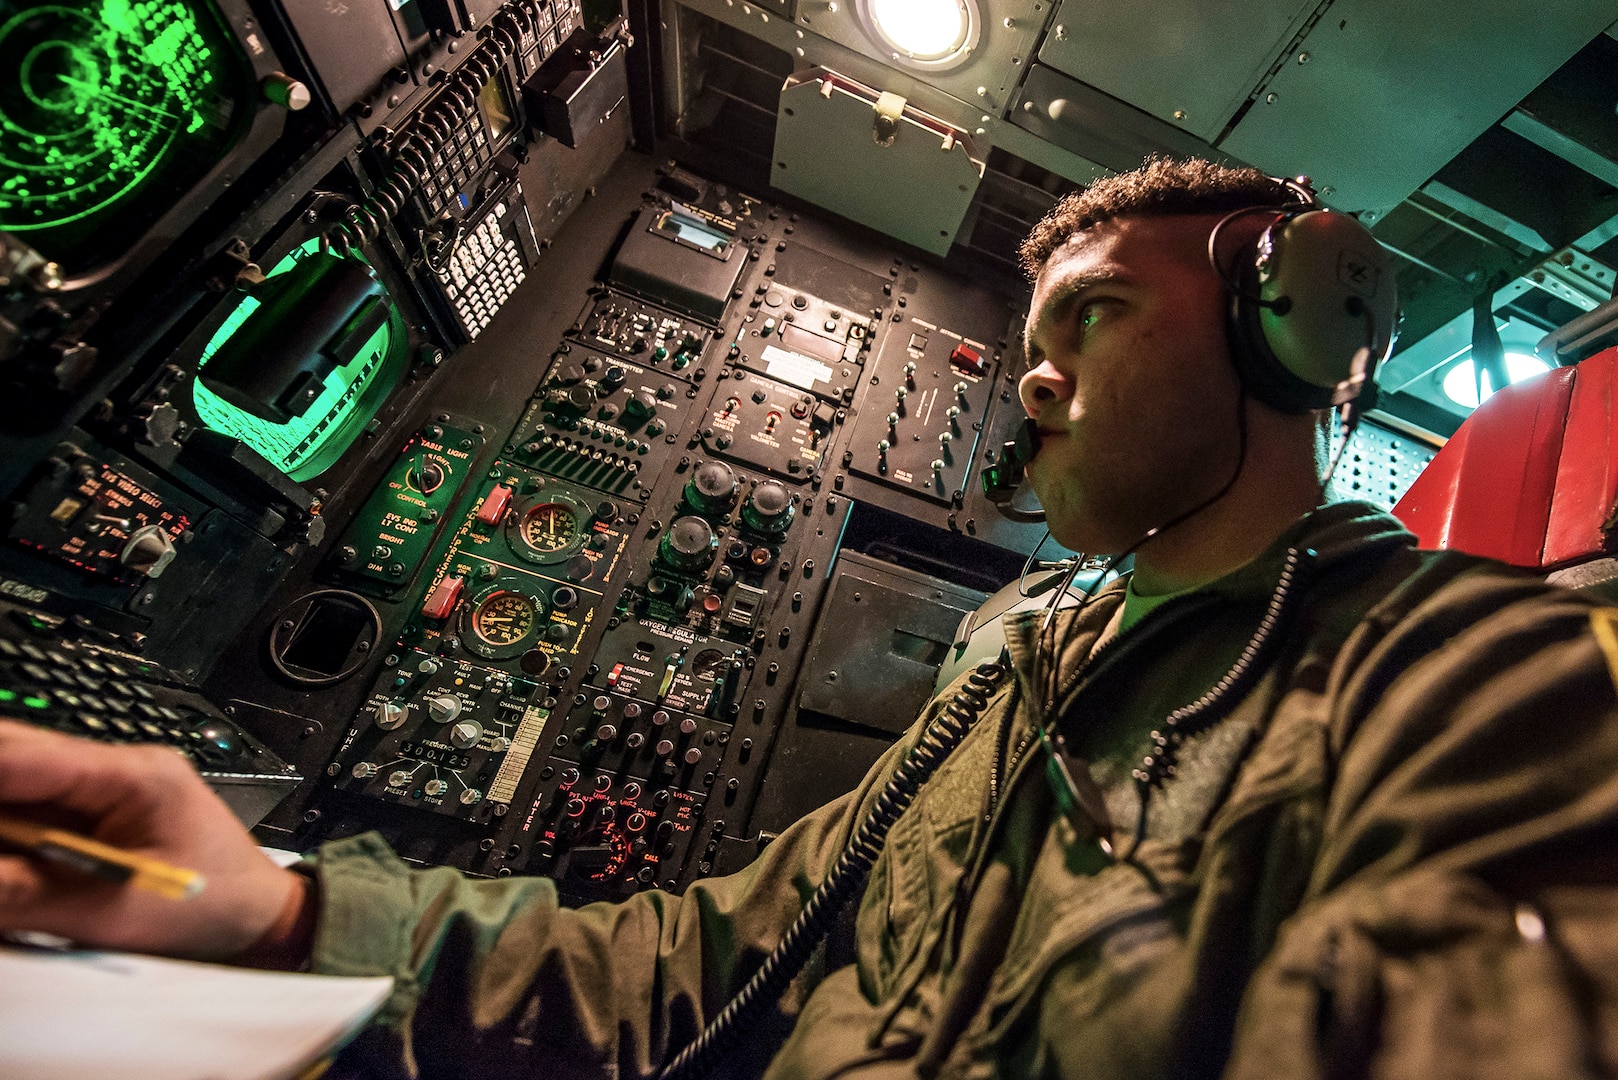 Air Force 1st Lt. Nathan Fisher, 23rd Bomb Squadron weapons system officer, analyzes an offensive avionics system inside a B-52H Stratofortress above North Dakota. Fisher sits in the offense compartment of the aircraft, controlling the B-52’s weapons capabilities.